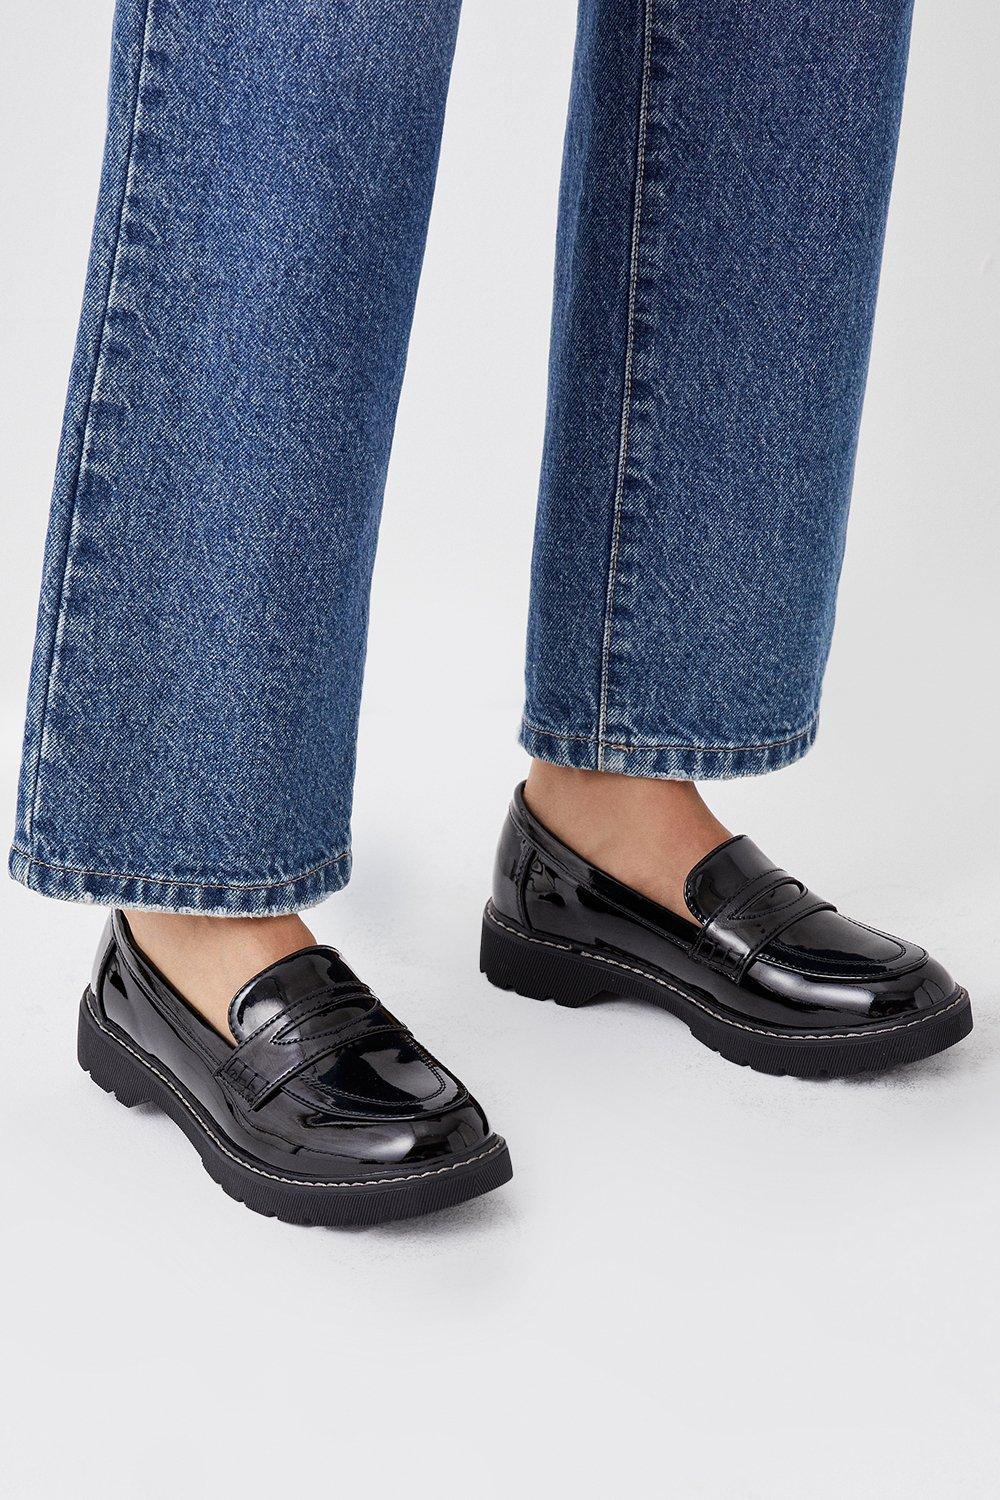 Women's Lucy Patent Loafers - true black - 5